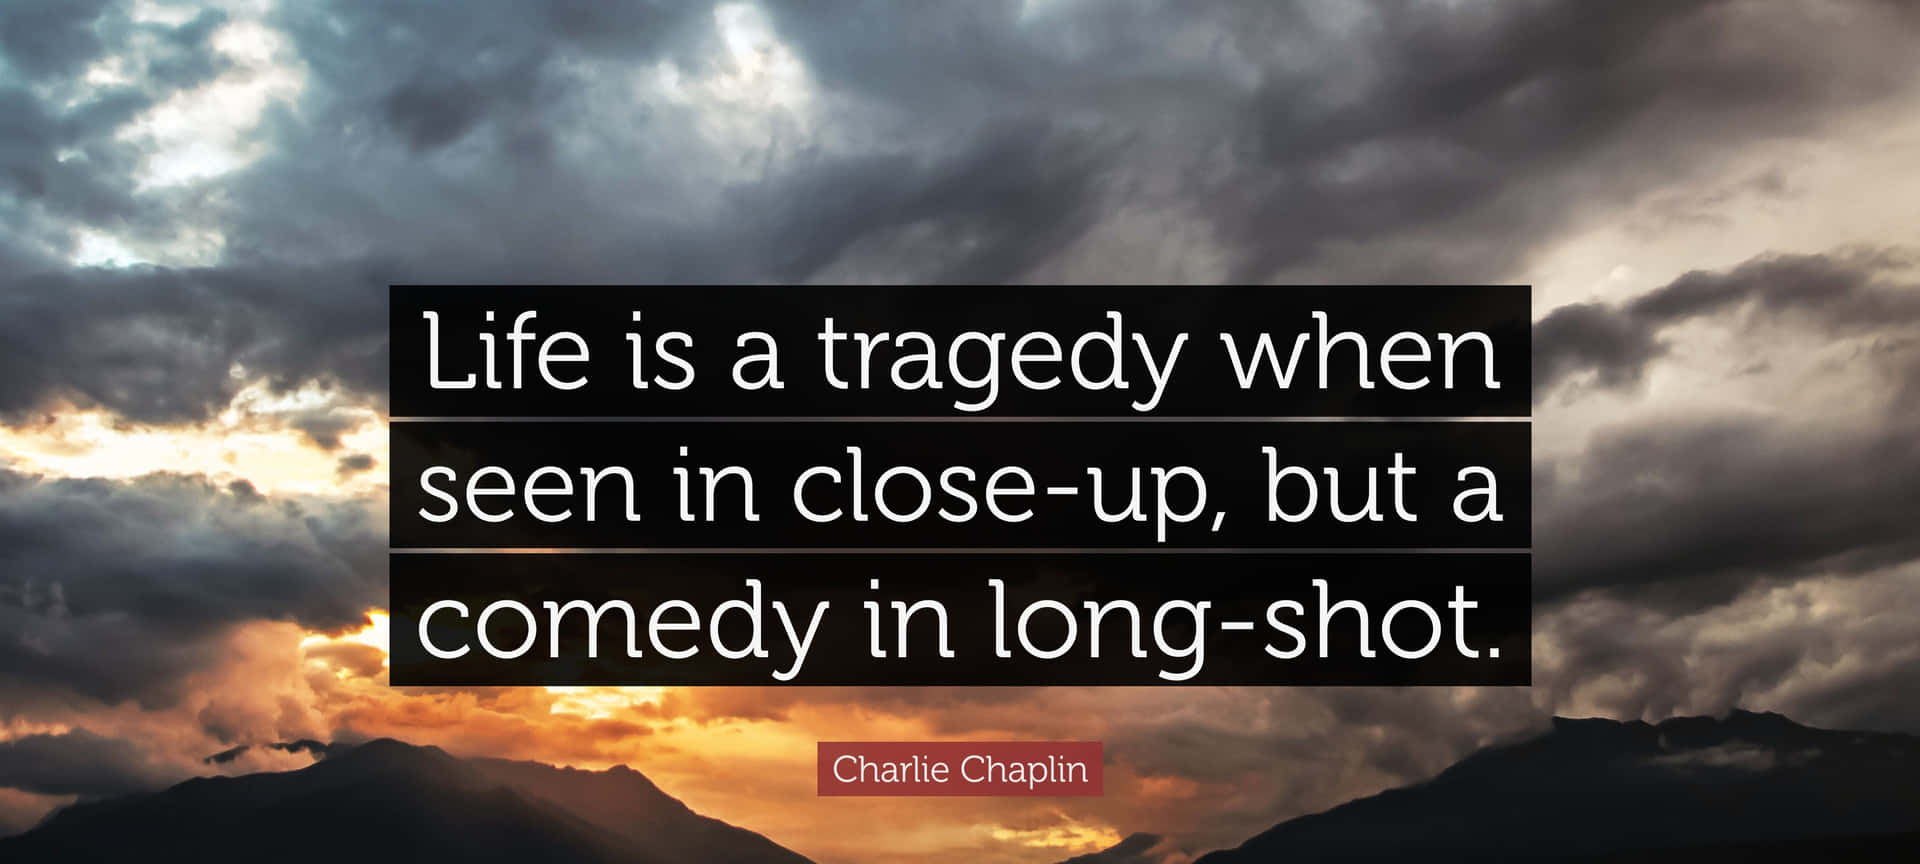 Tragedy Comedy Life Quote Chaplin Wallpaper